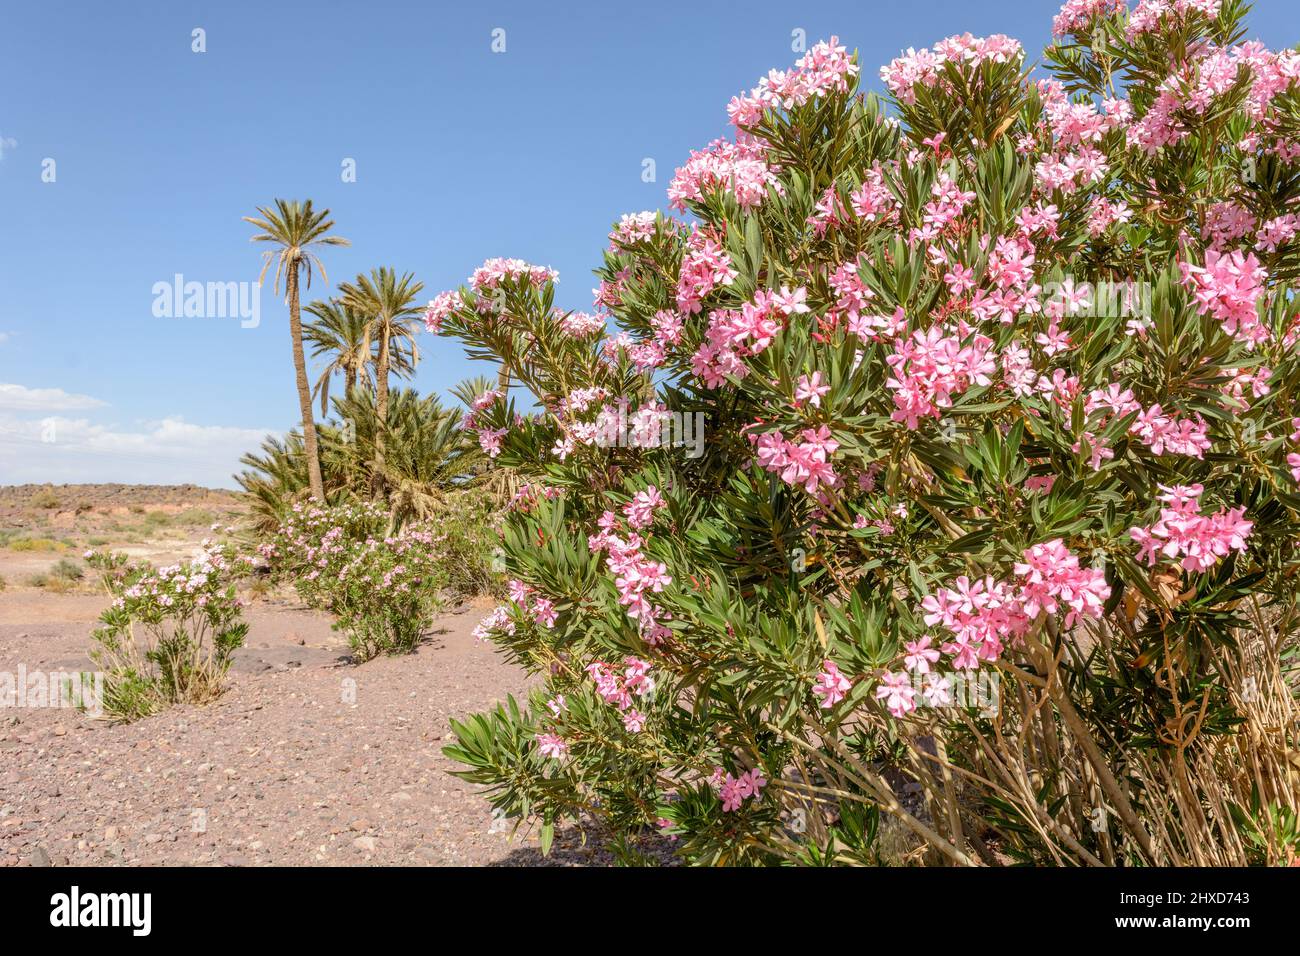 Plant oasis of palm trees and oleander in a stone desert in Morocco. Dry and mineral landscape. Stock Photo